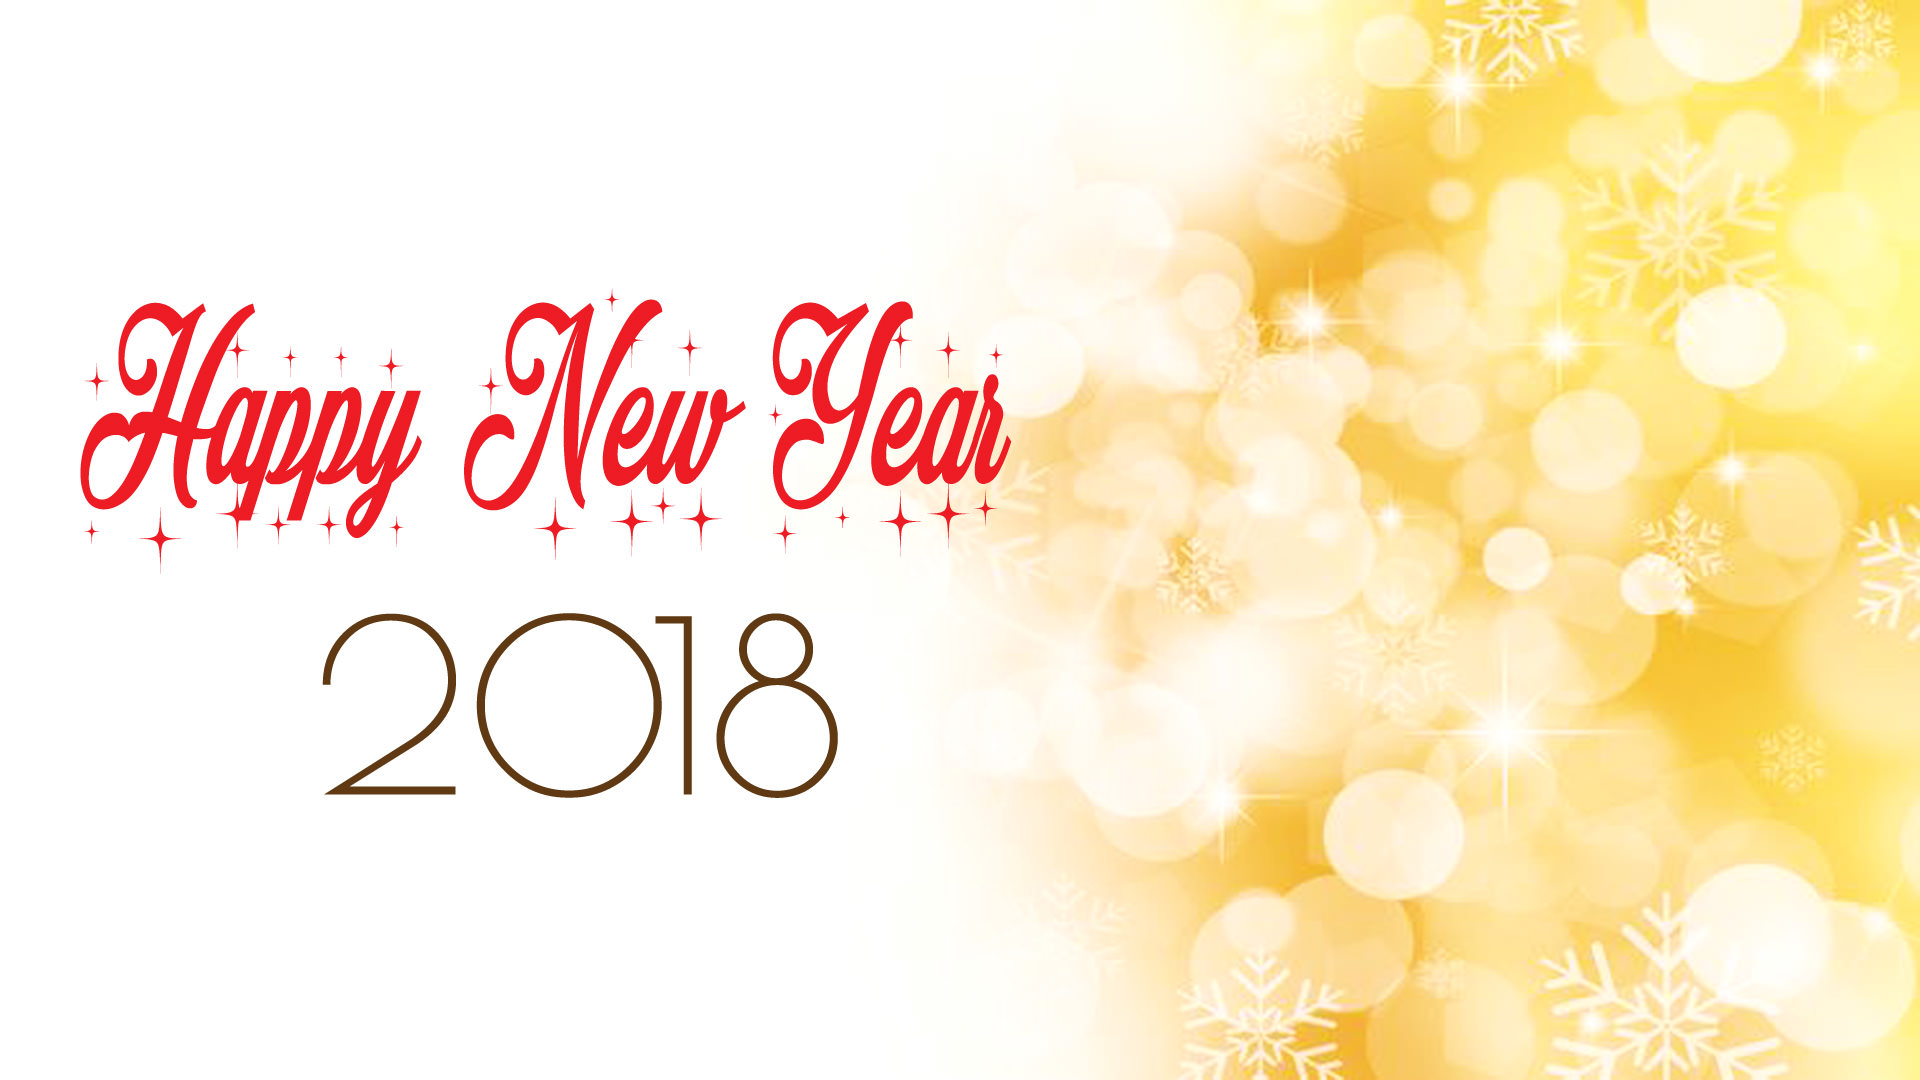 Happy New Year 2018 Background Photo - Happy New Year 2018 Background - HD Wallpaper 